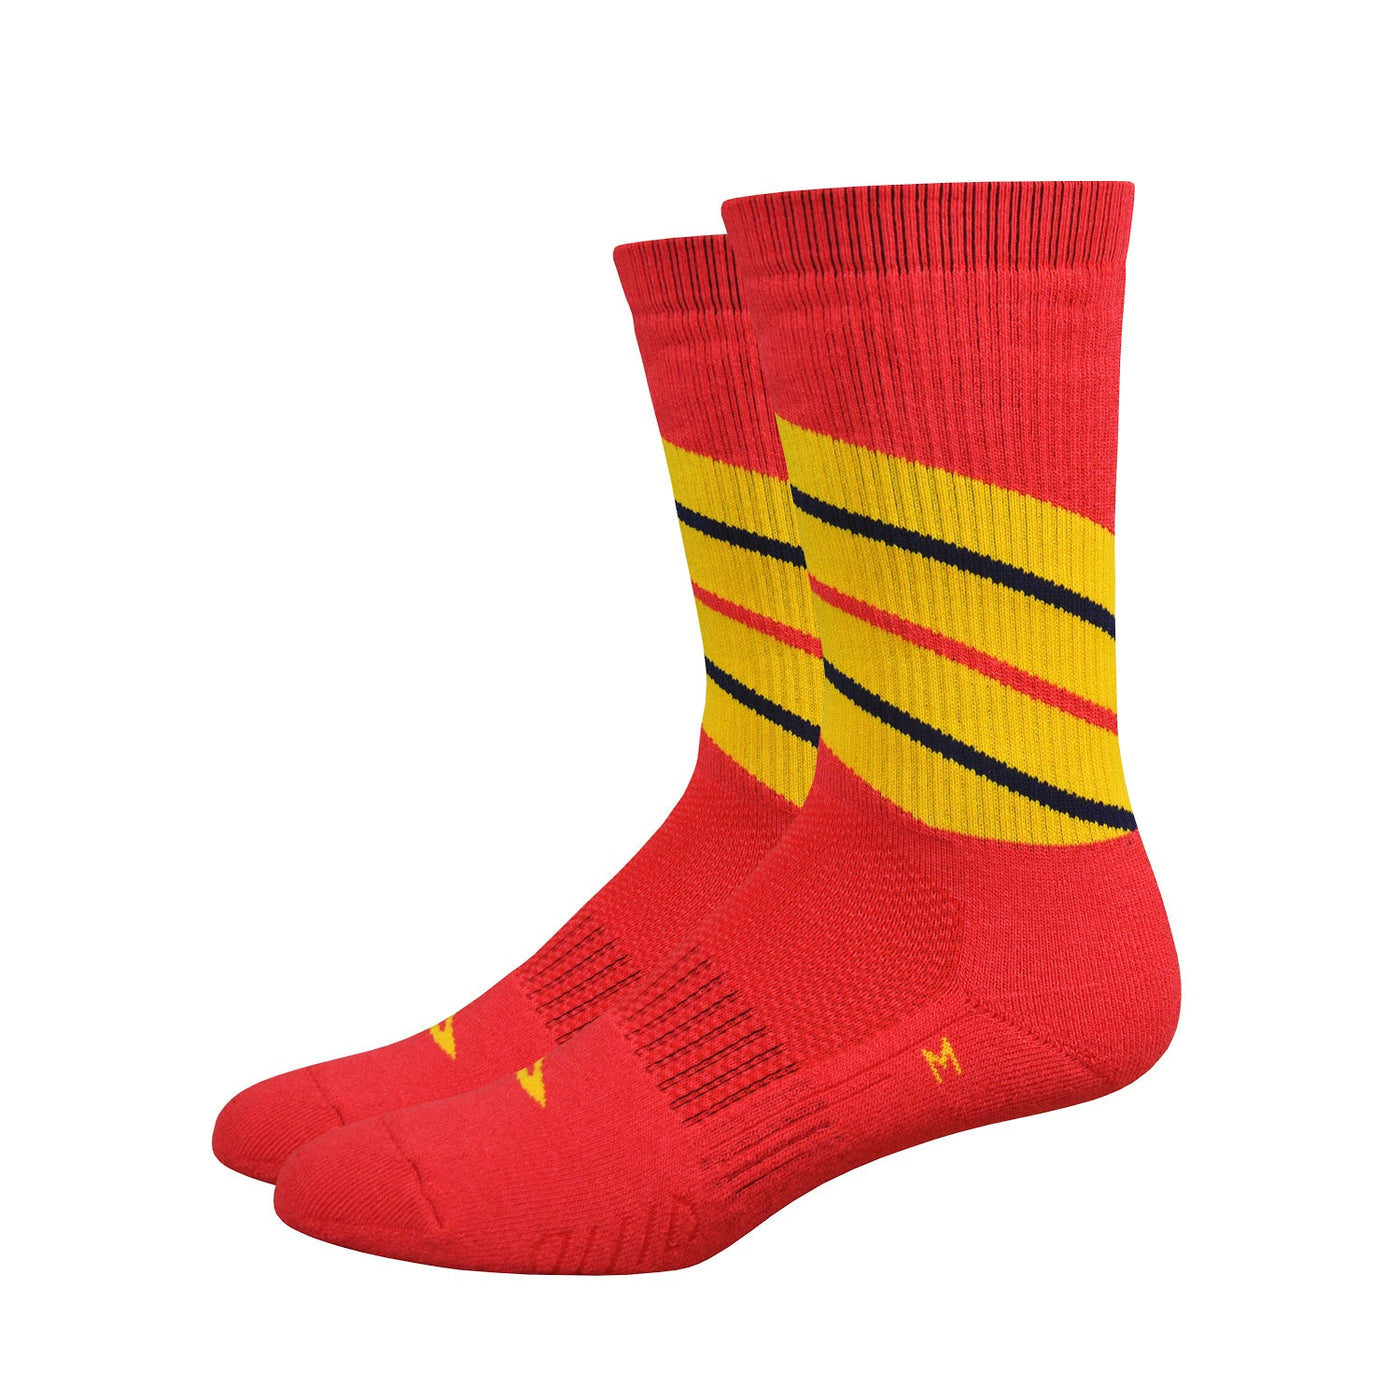 Thermeator 6" Twister (Red) - DeFeet